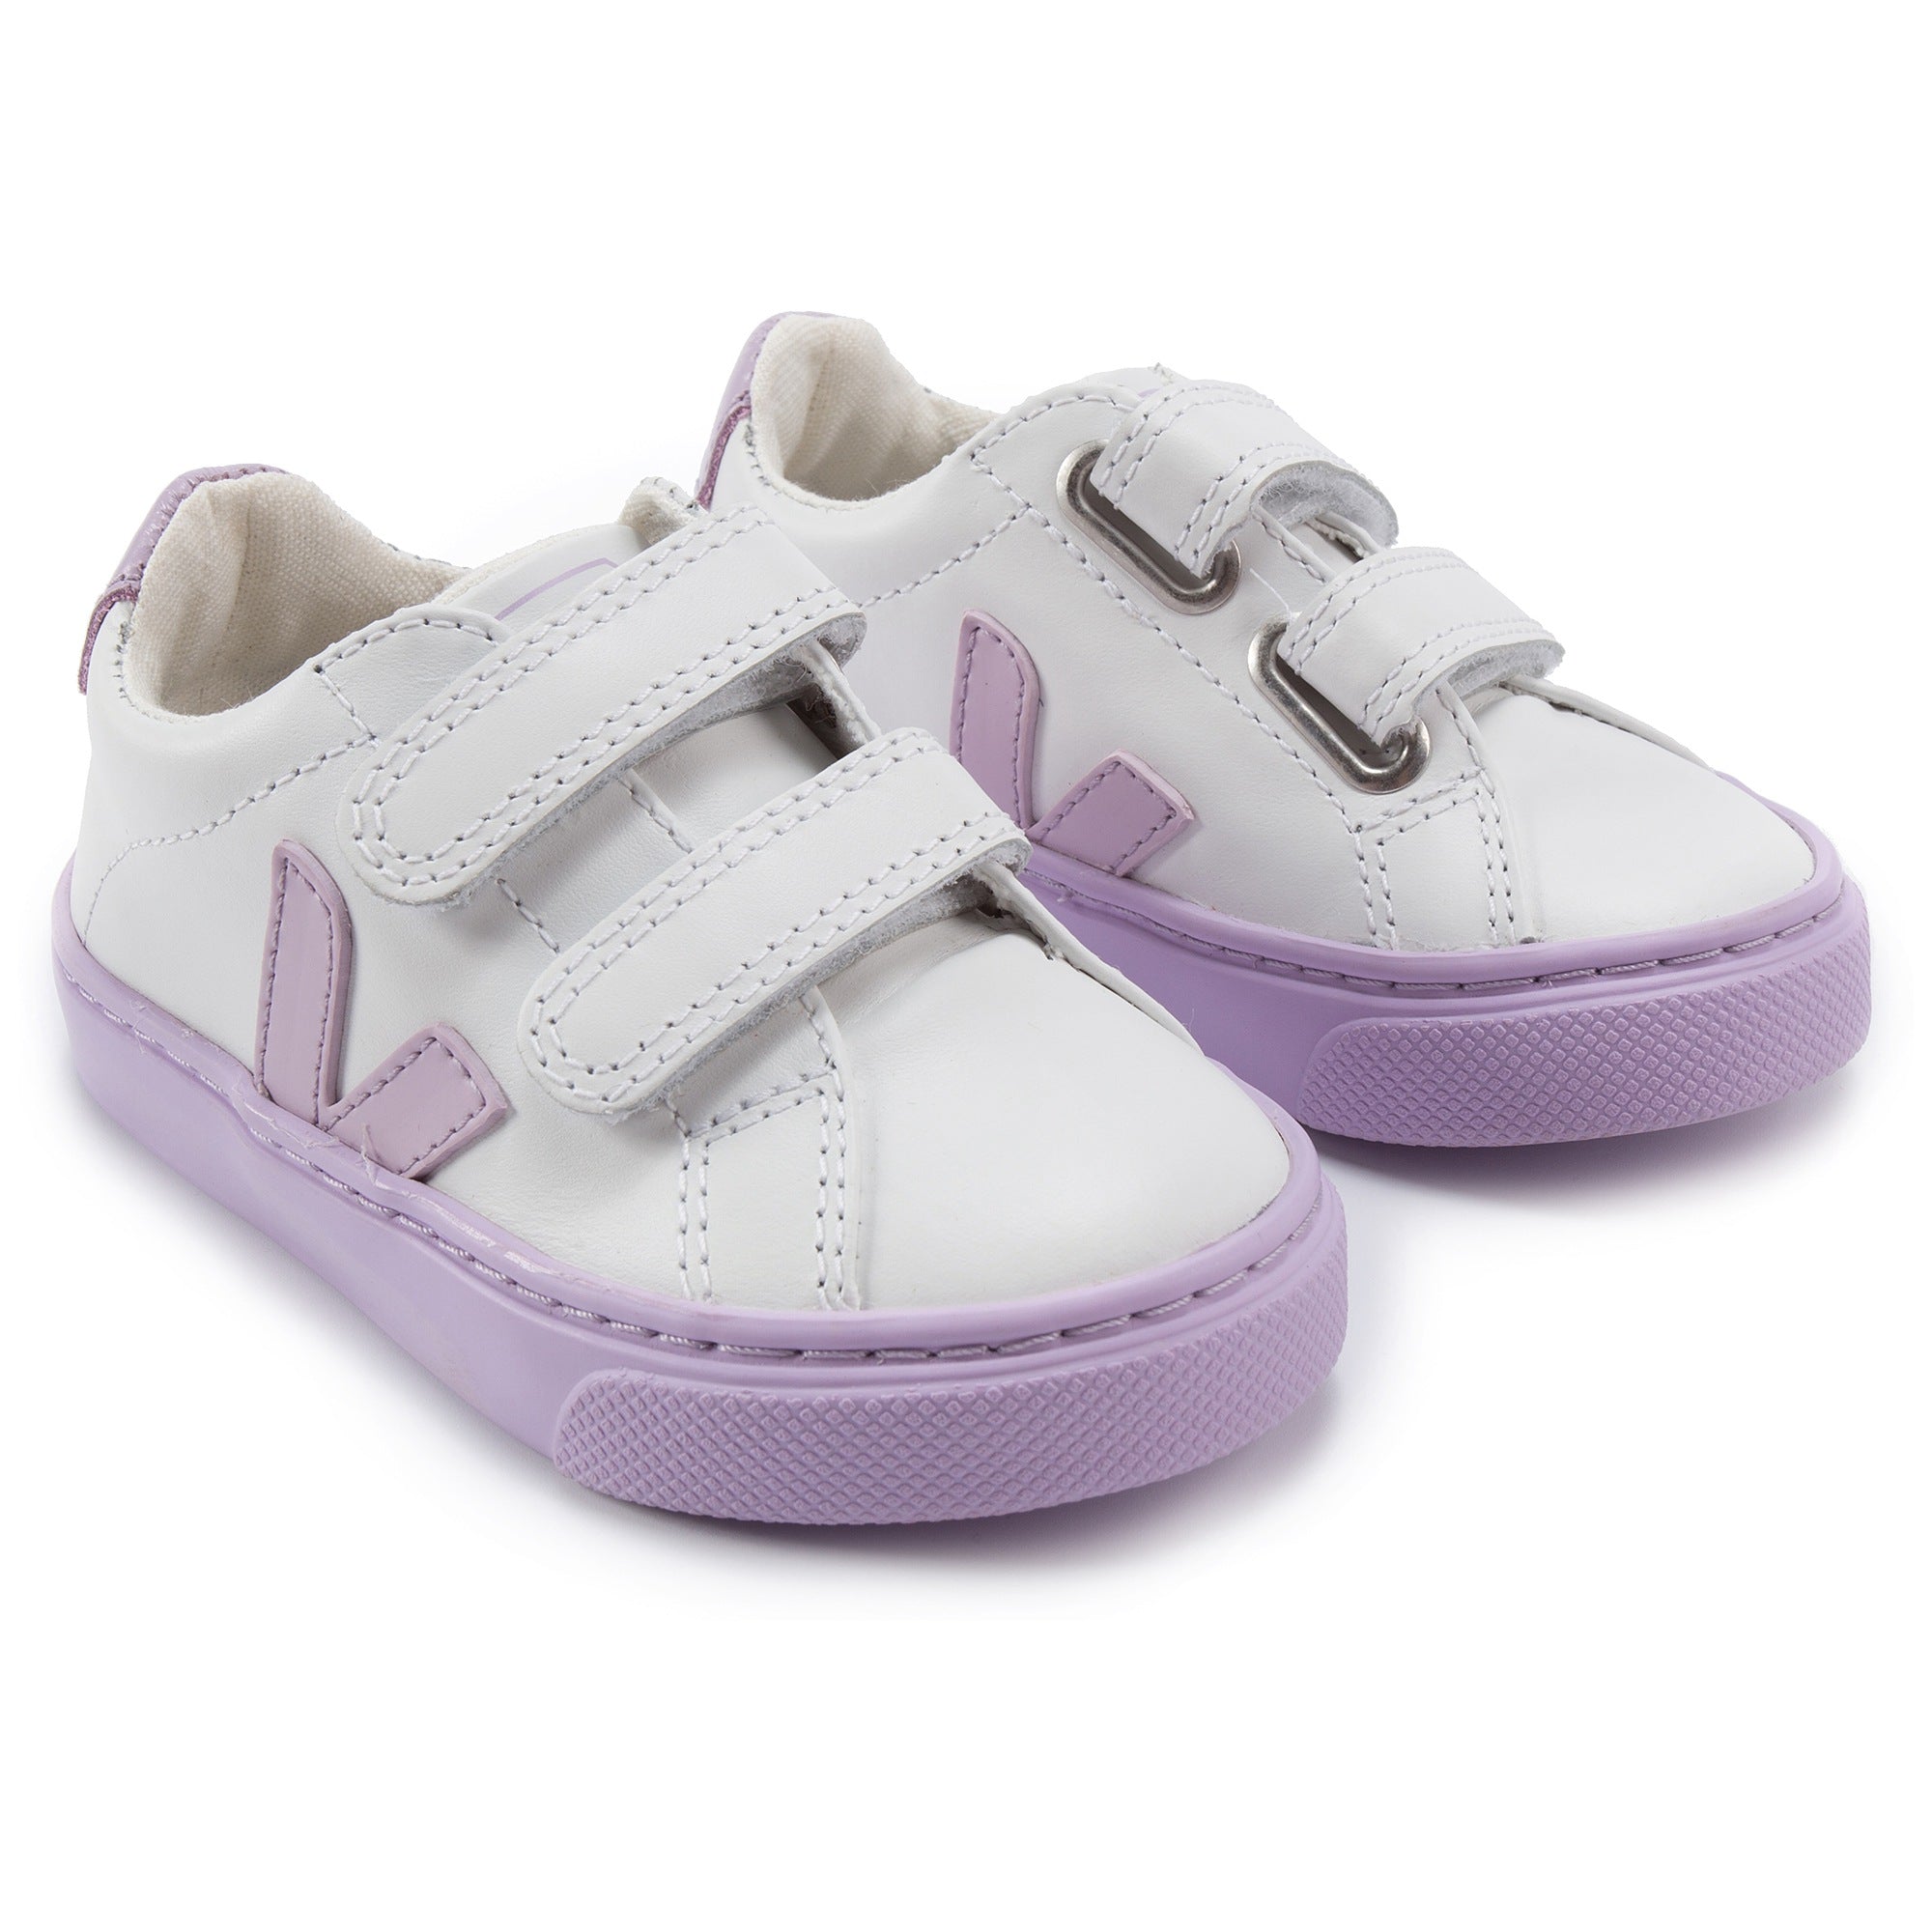 Girls Black Leather Velcro With Purple "V" Shoes